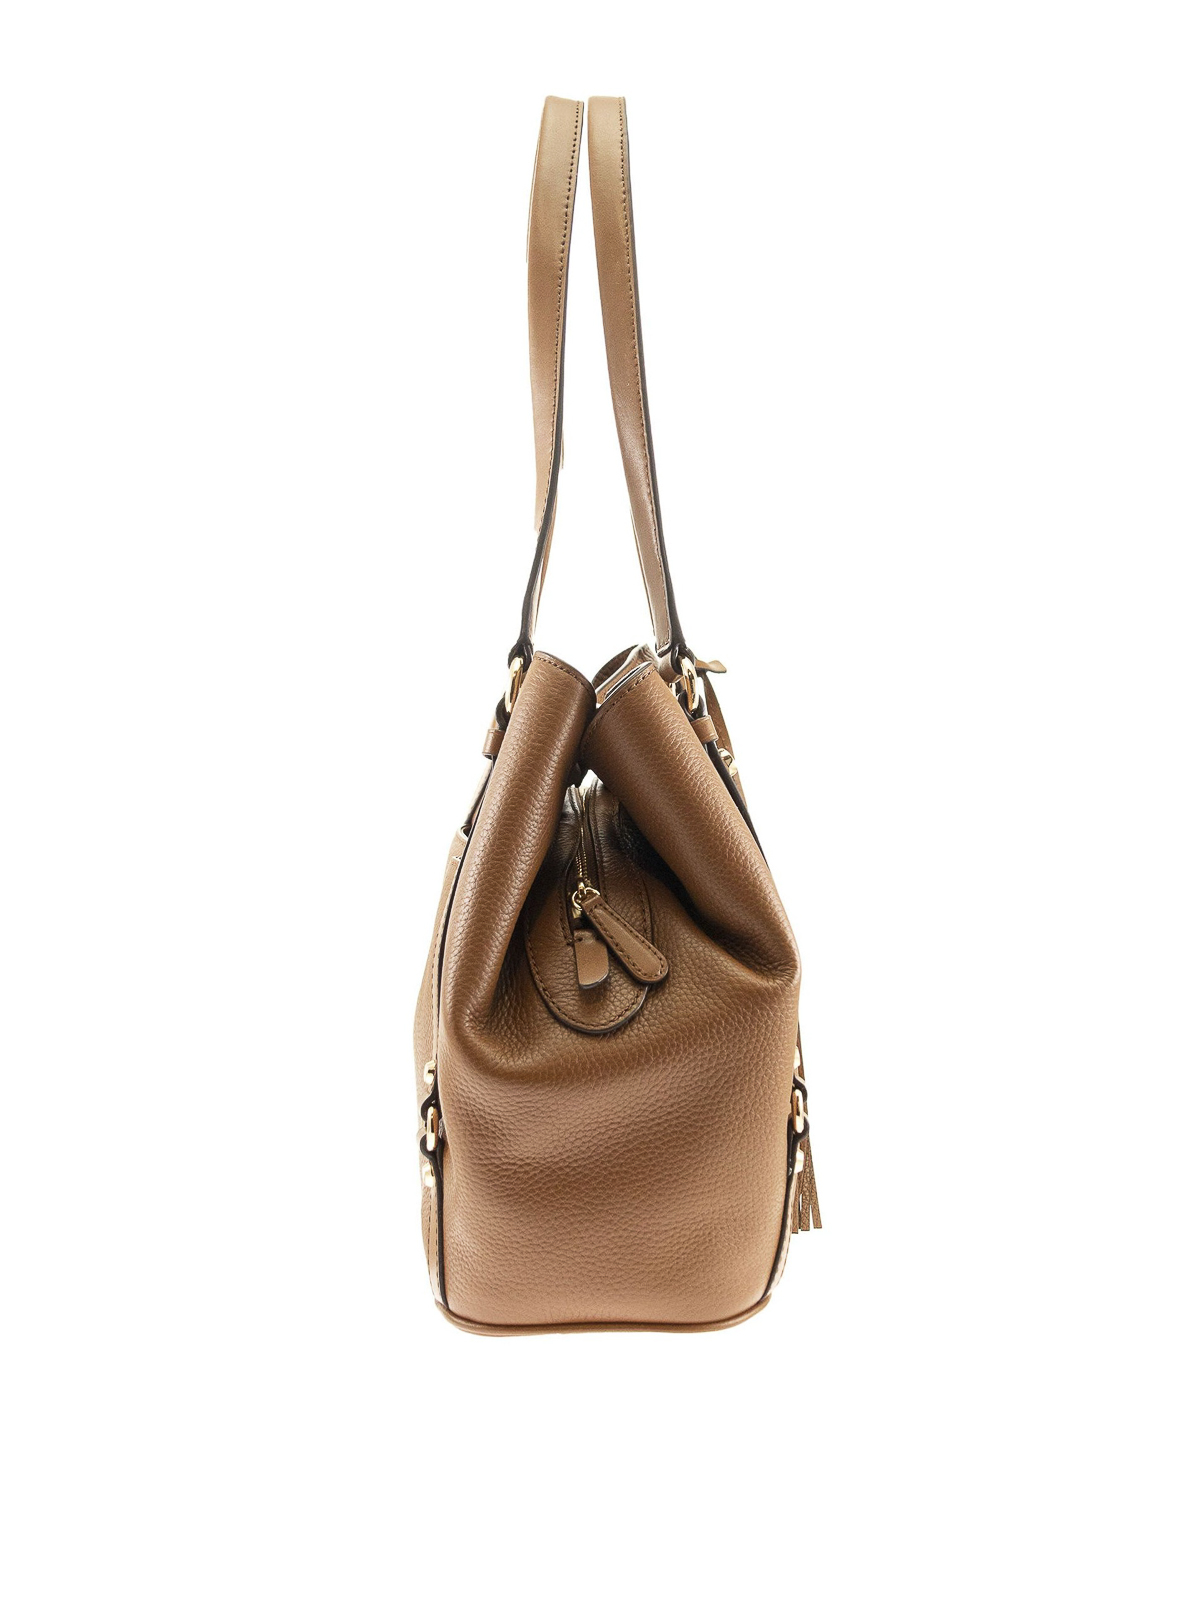 MICHAEL KORS MD MARILYN SATCHEL BAG IN SAFFIANO LEATHER Woman Camel